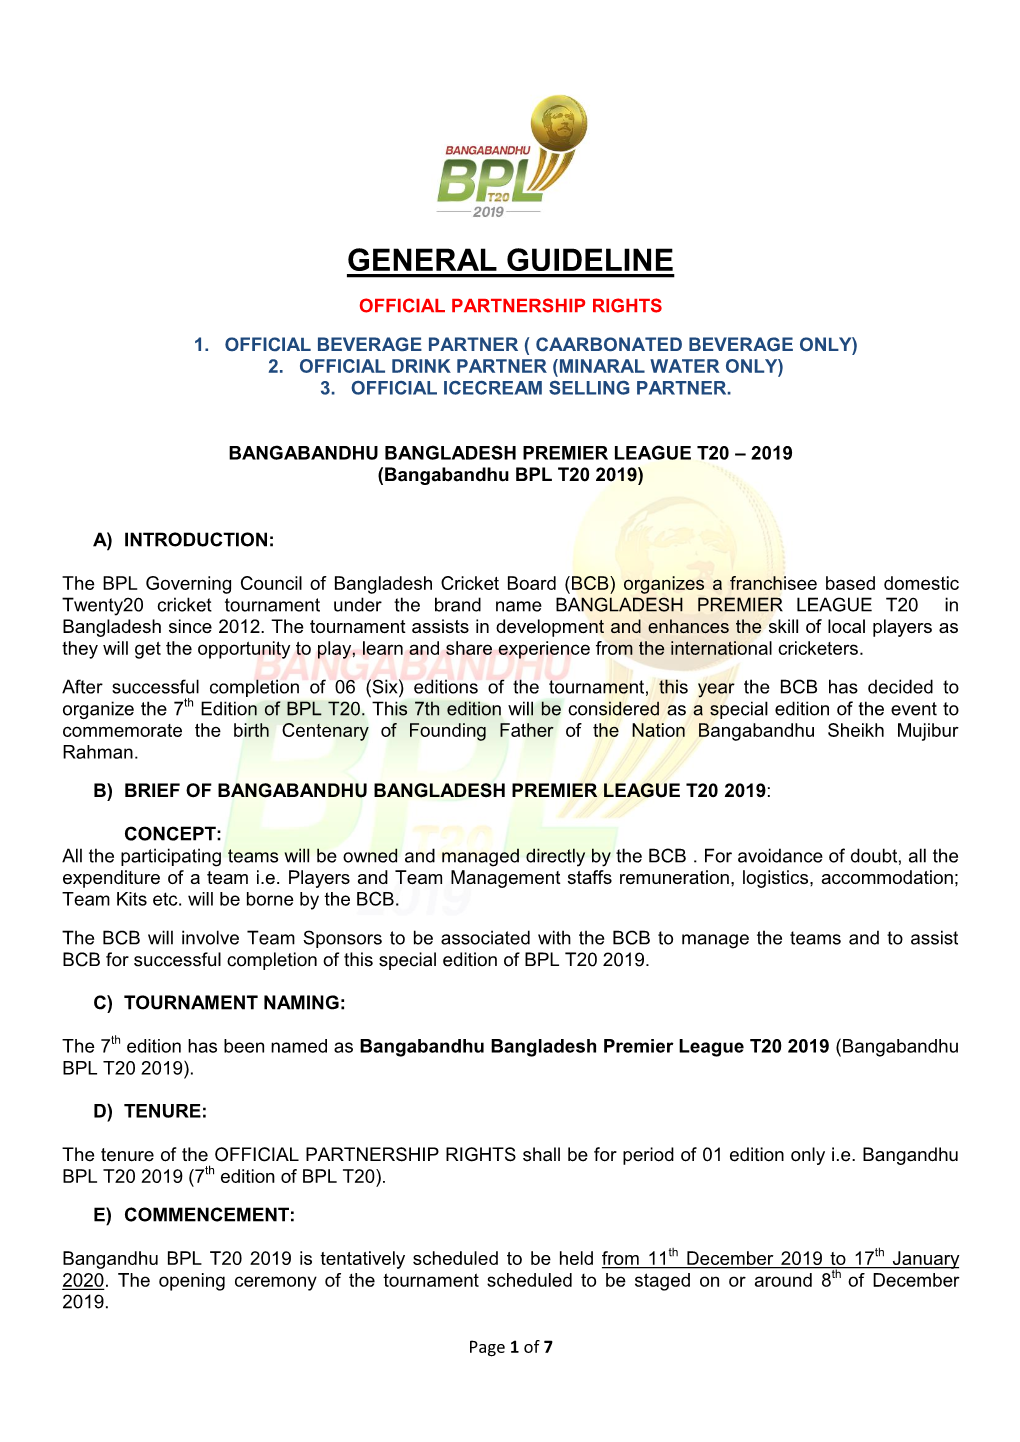 GENERAL GUIDELINE – Official Partnership Rights – BBPL T20 -2019